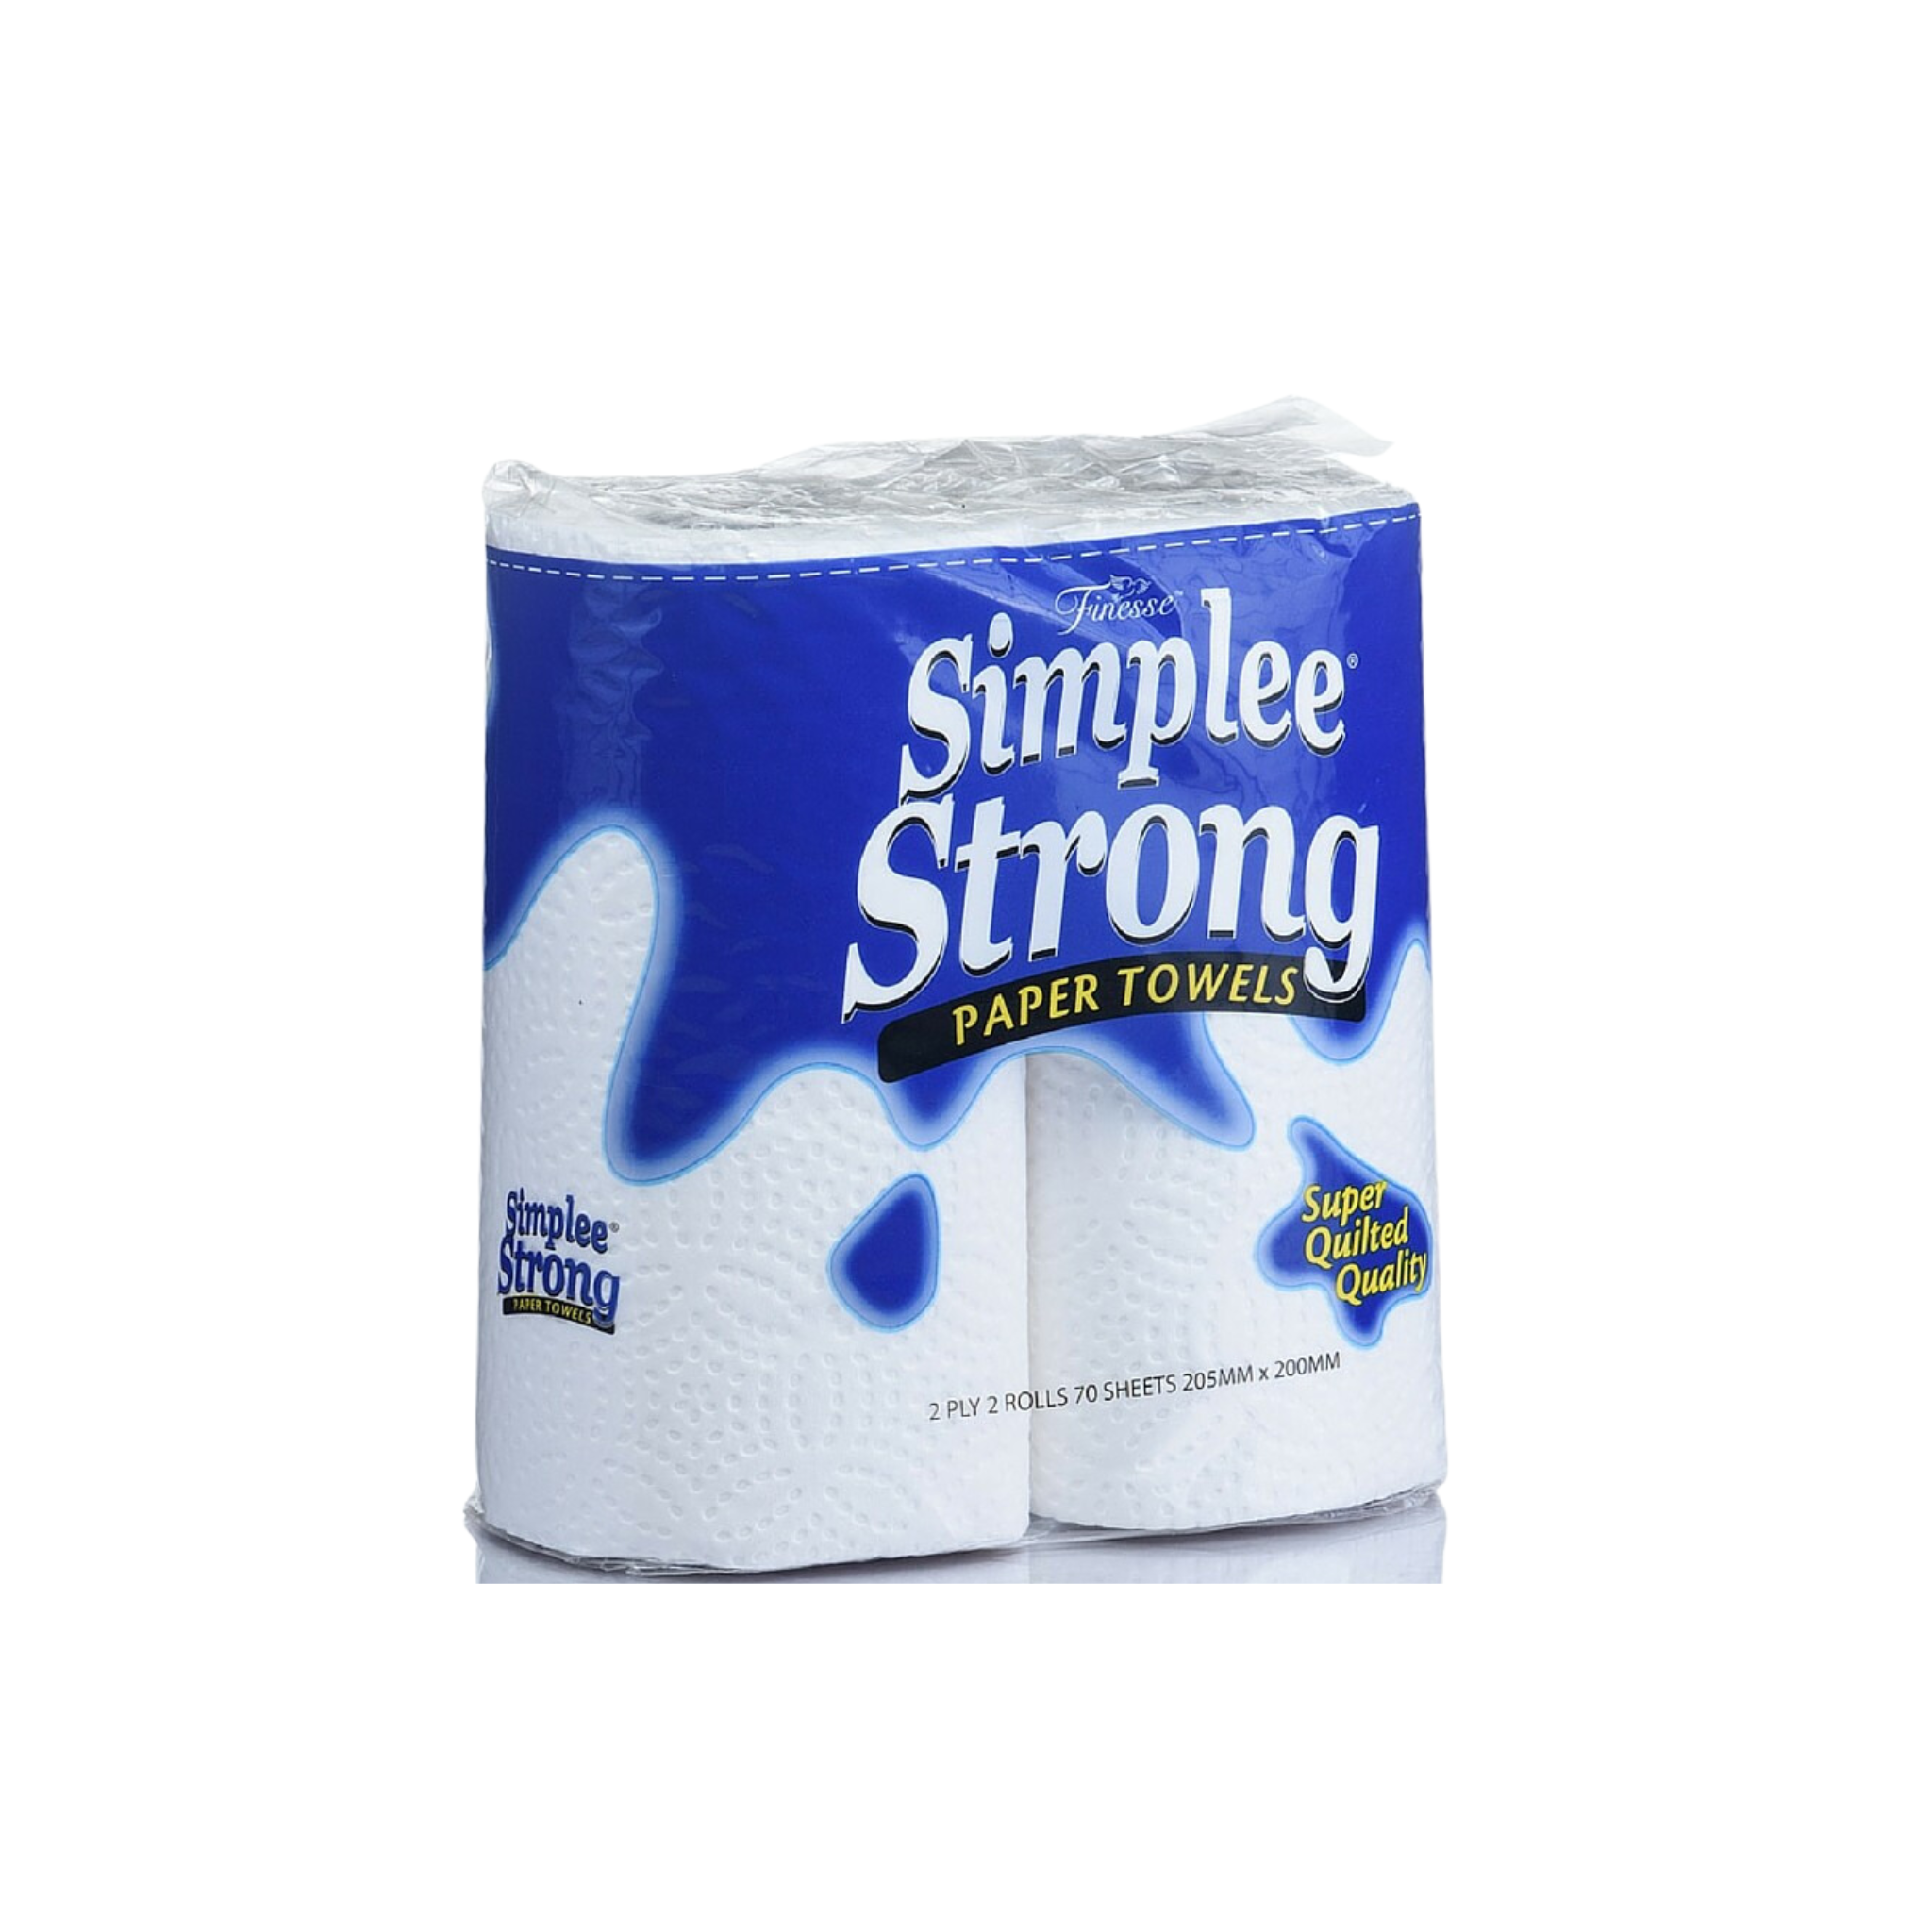 Kitchen Hand Towel 2ply 24x60 Sheets - Simplee Strong